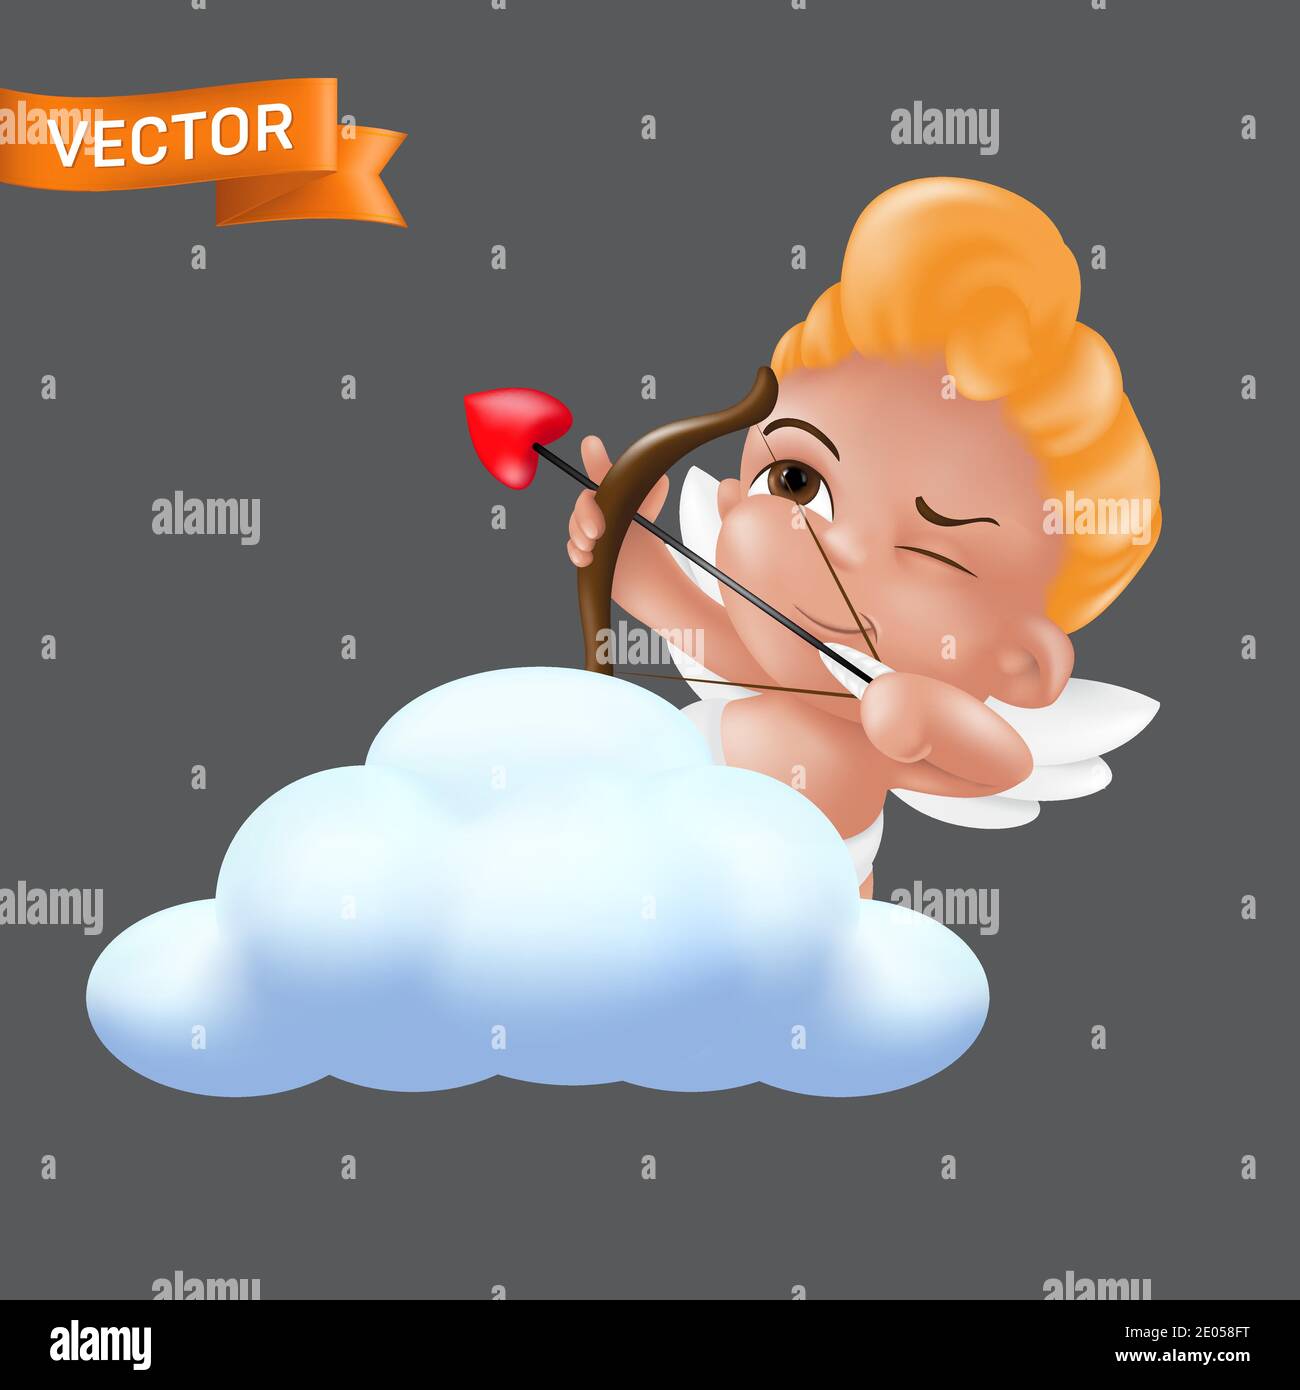 Shooting and aiming with a bow and arrow little cupid character. Vector illustration of a baby cherub mascot in a diaper sticking out of the cloud iso Stock Vector